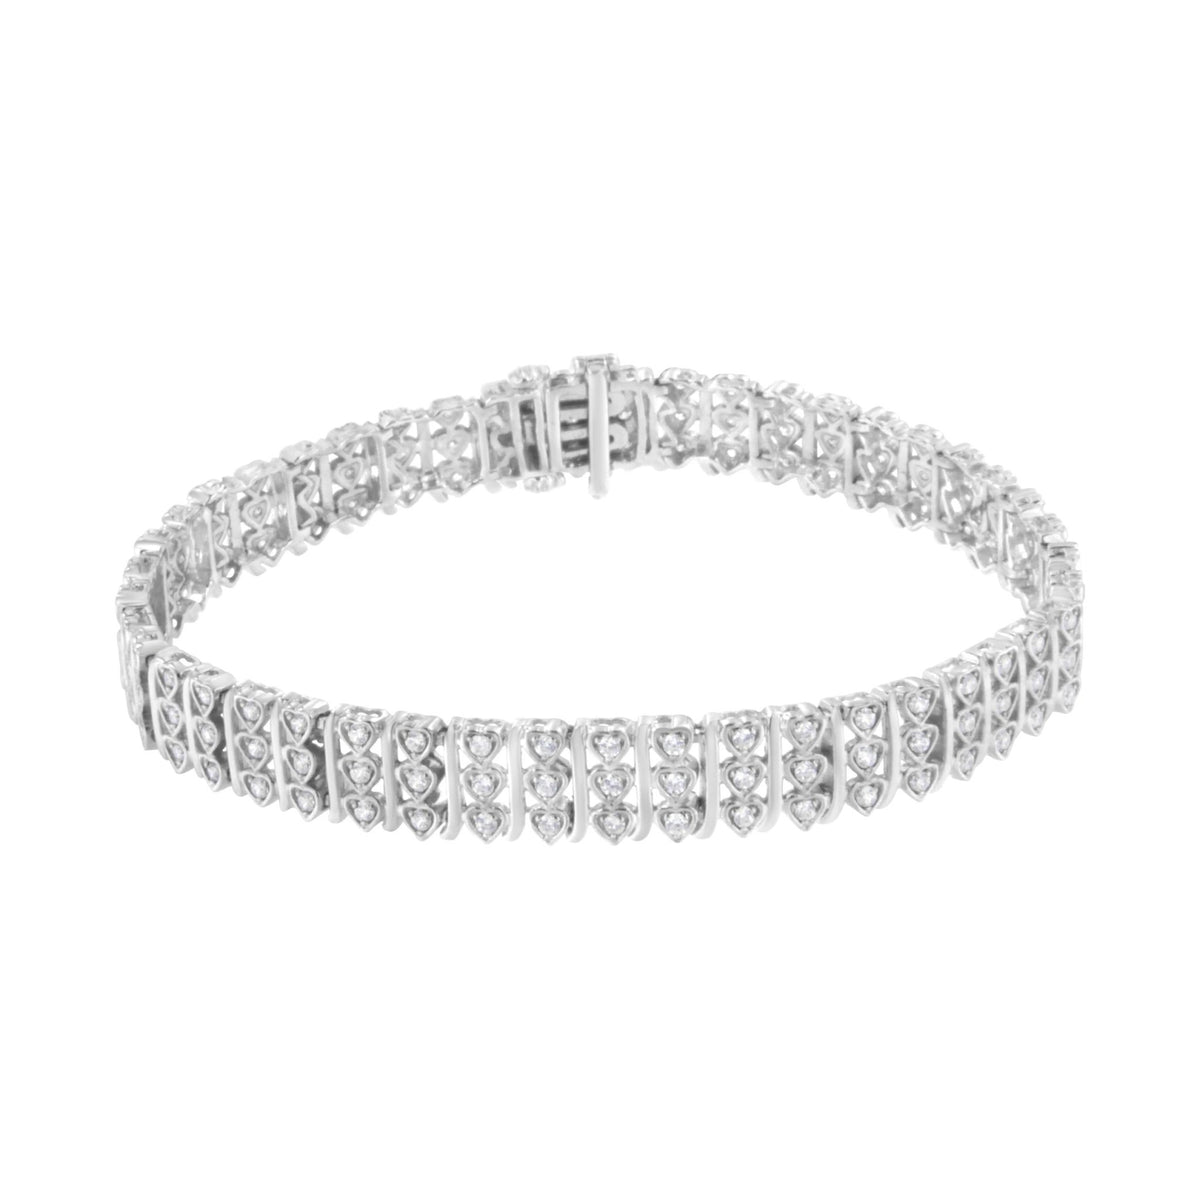 .925 Sterling Silver 1 1/2 cttw Round Diamond 3 Row Heart Link Bracelet (I-J Color,I3 Clarity) - 7.25 &quot; - LinkagejewelrydesignLinkagejewelrydesign